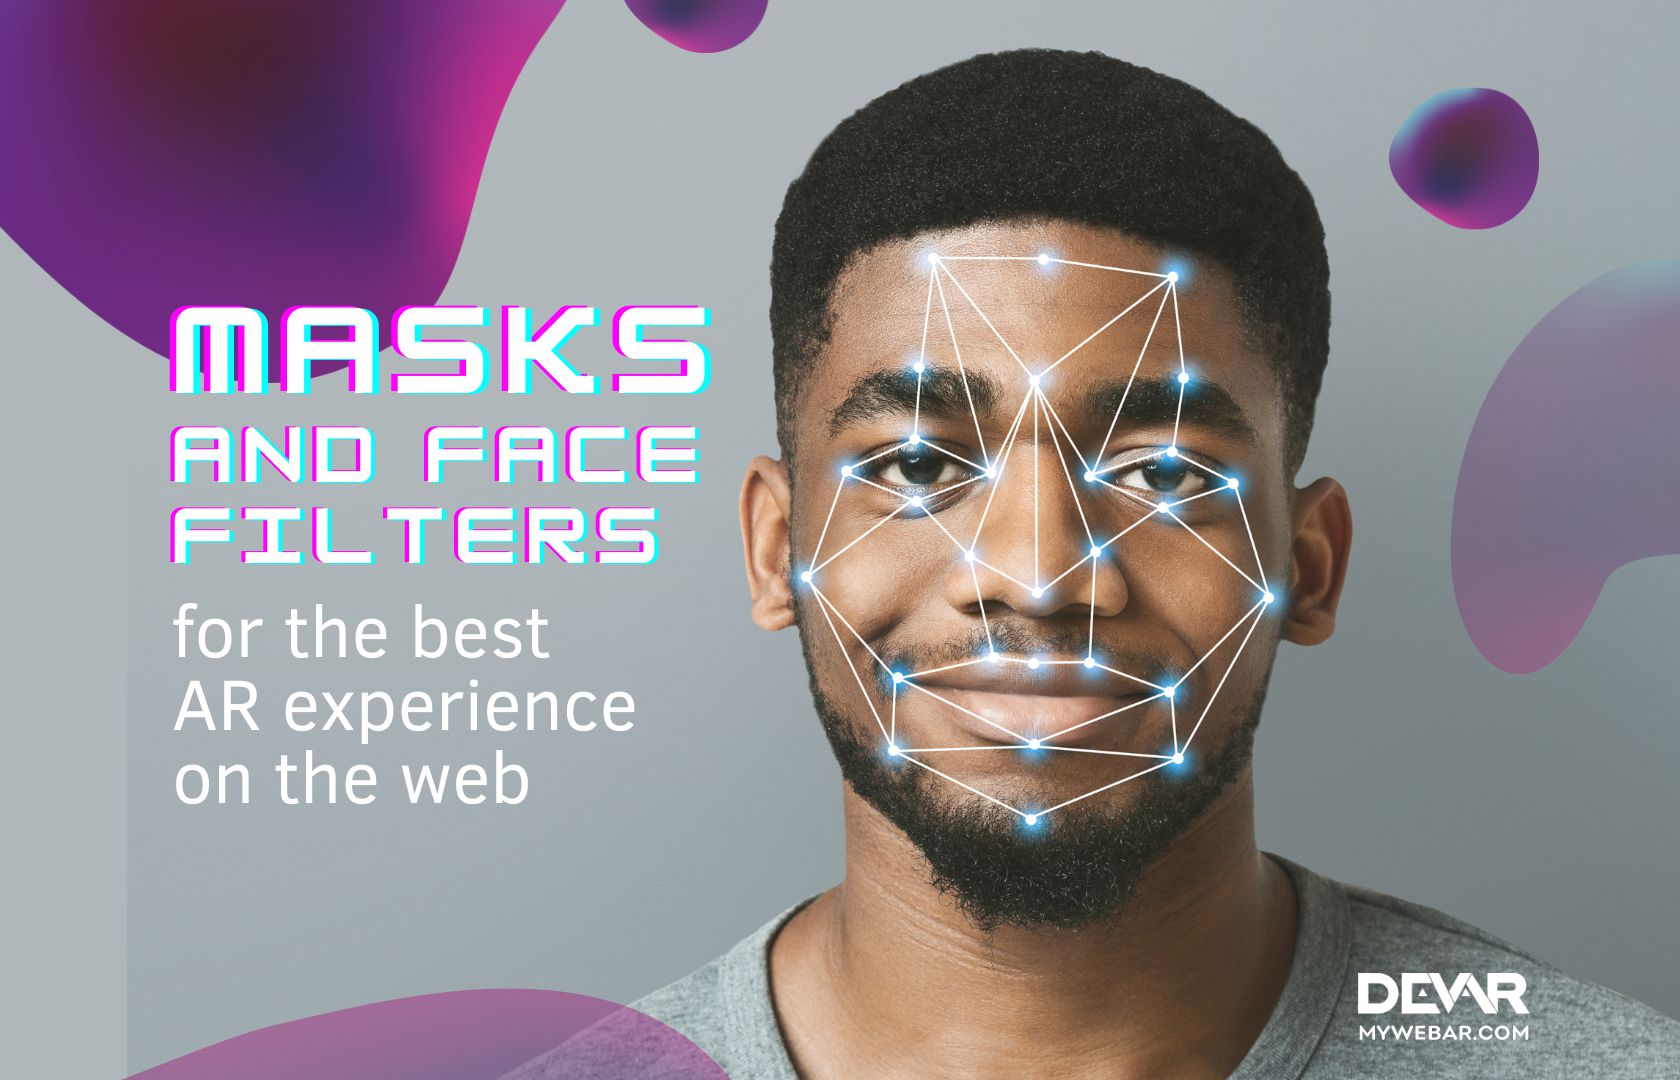 WOW! Masks & Face Filters for the best AR experience on the web